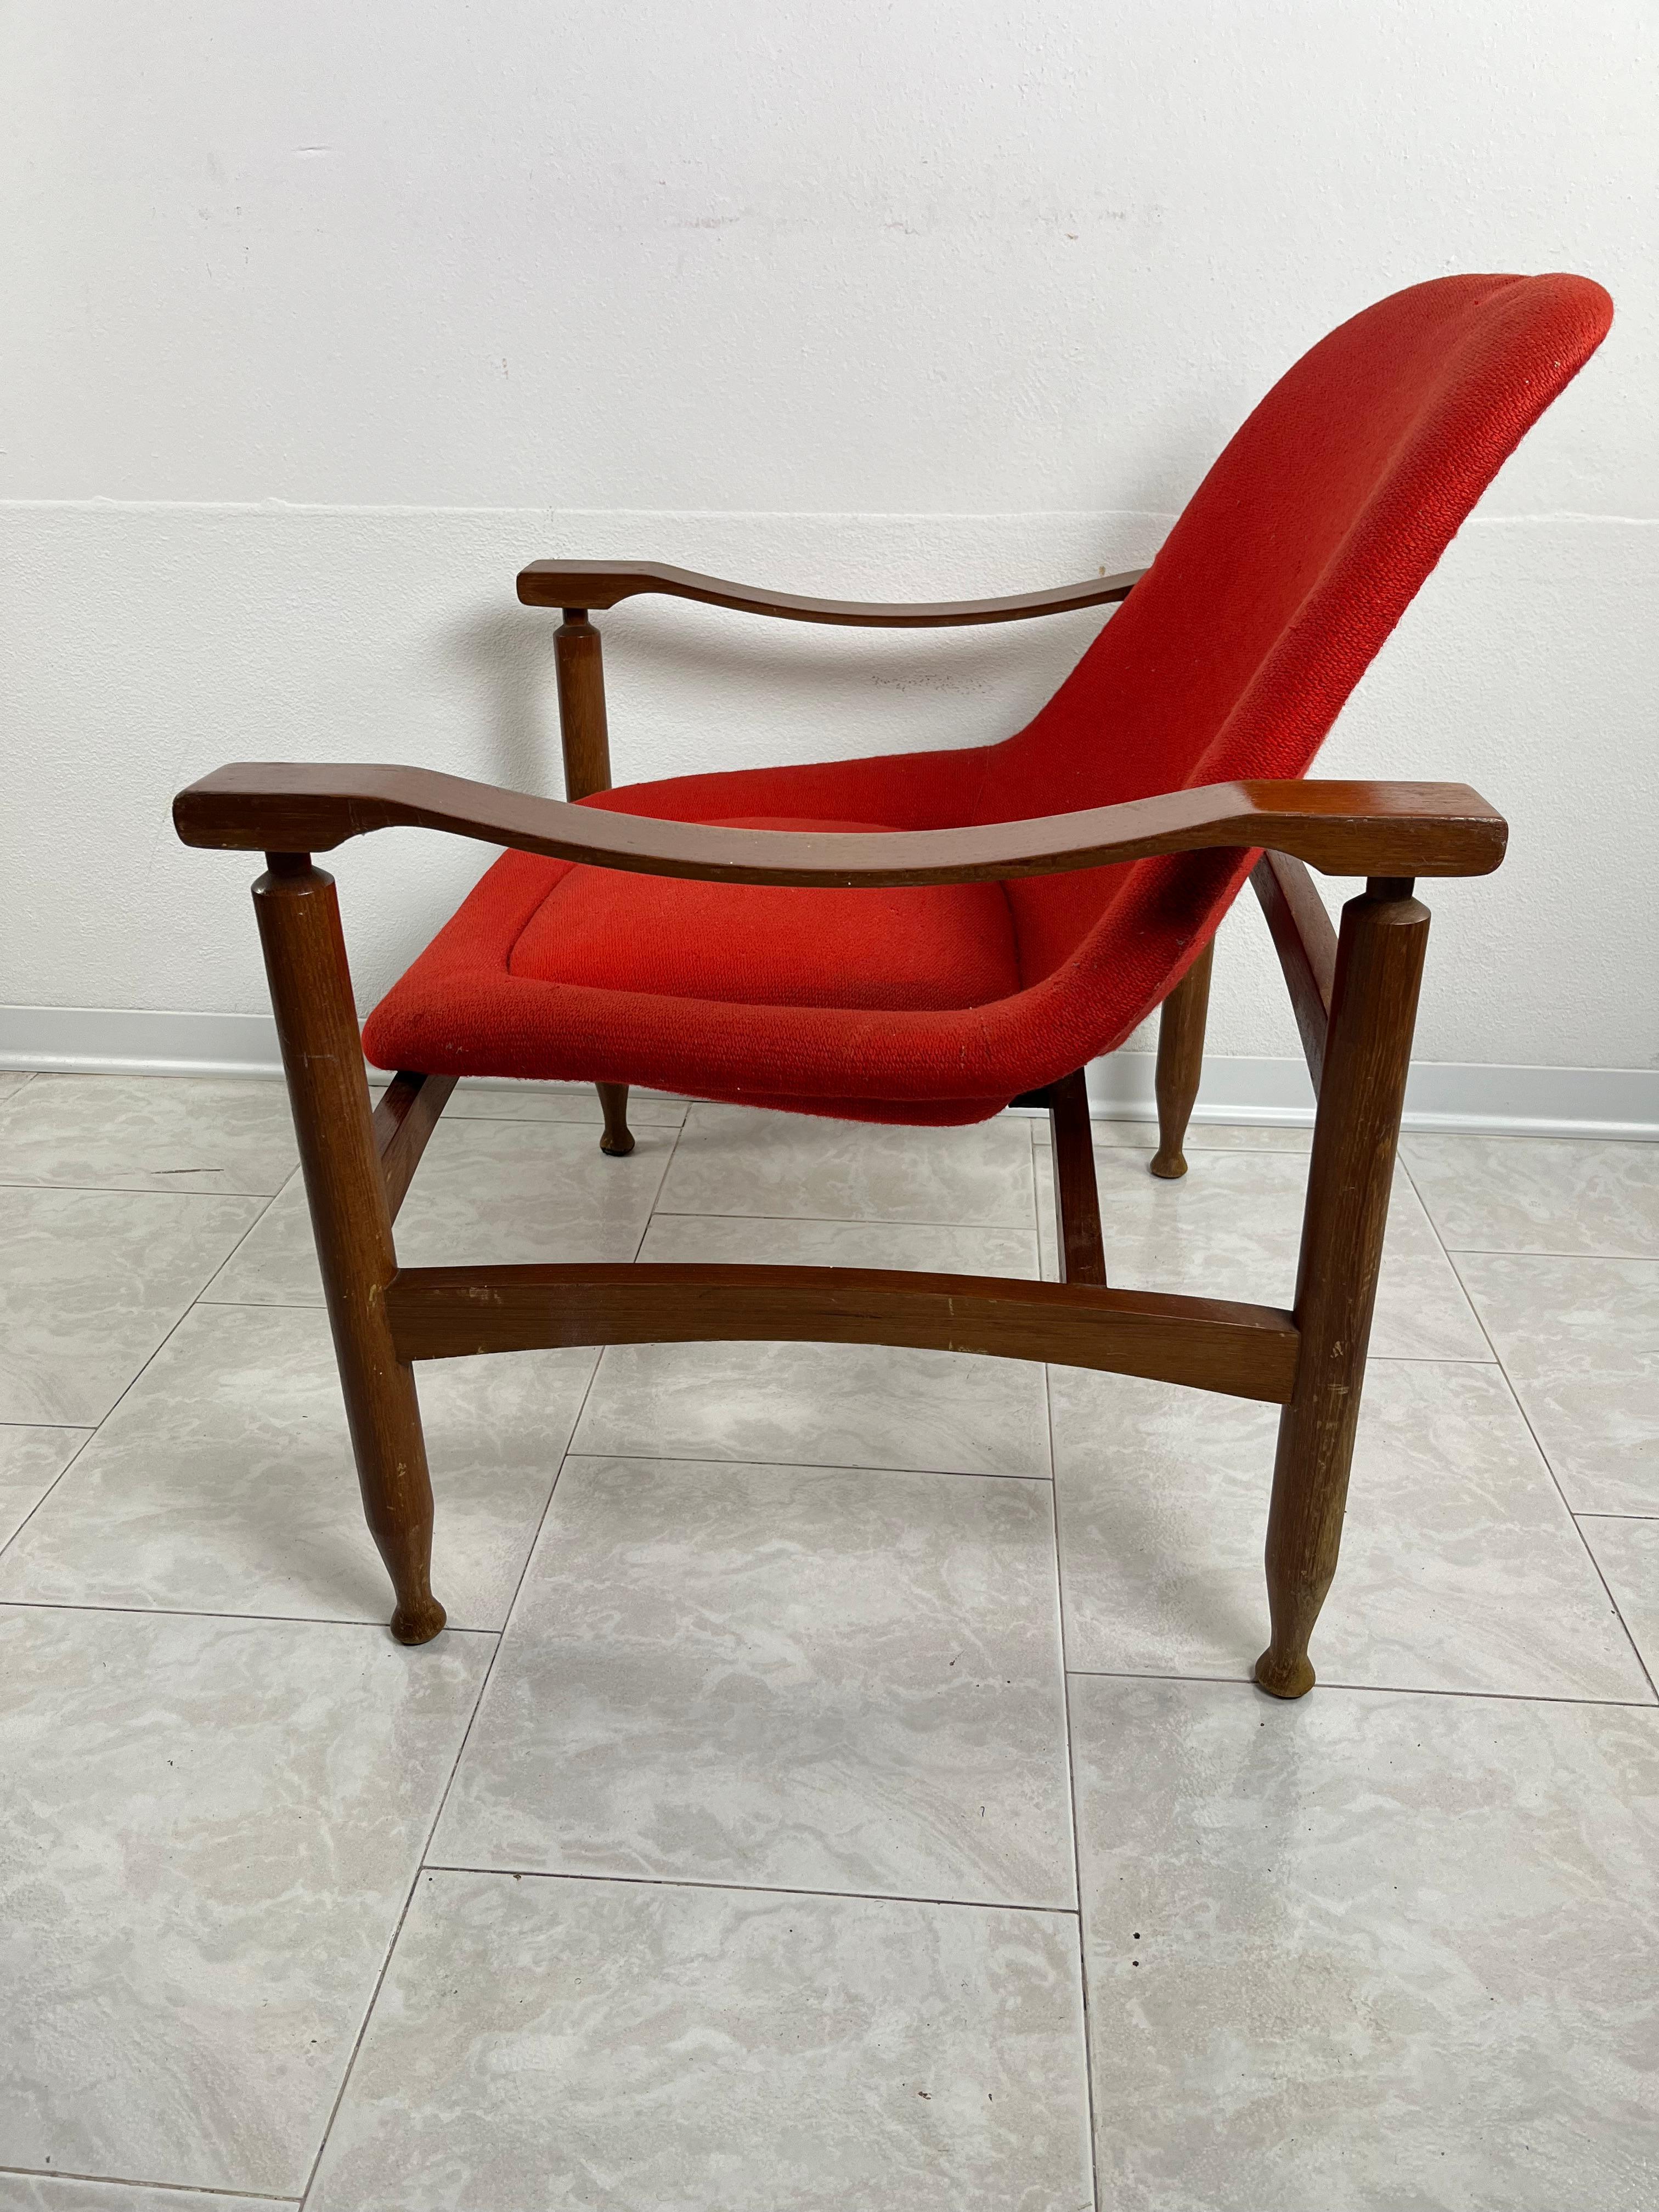 Busnelli armchair Mid-Century Italian design 1950s
Intact and in good condition, small signs of aging. It belonged to the father of a famous interior designer in my city.

Busnelli.
The history of the Busnelli Industrial Group begins in Meda in